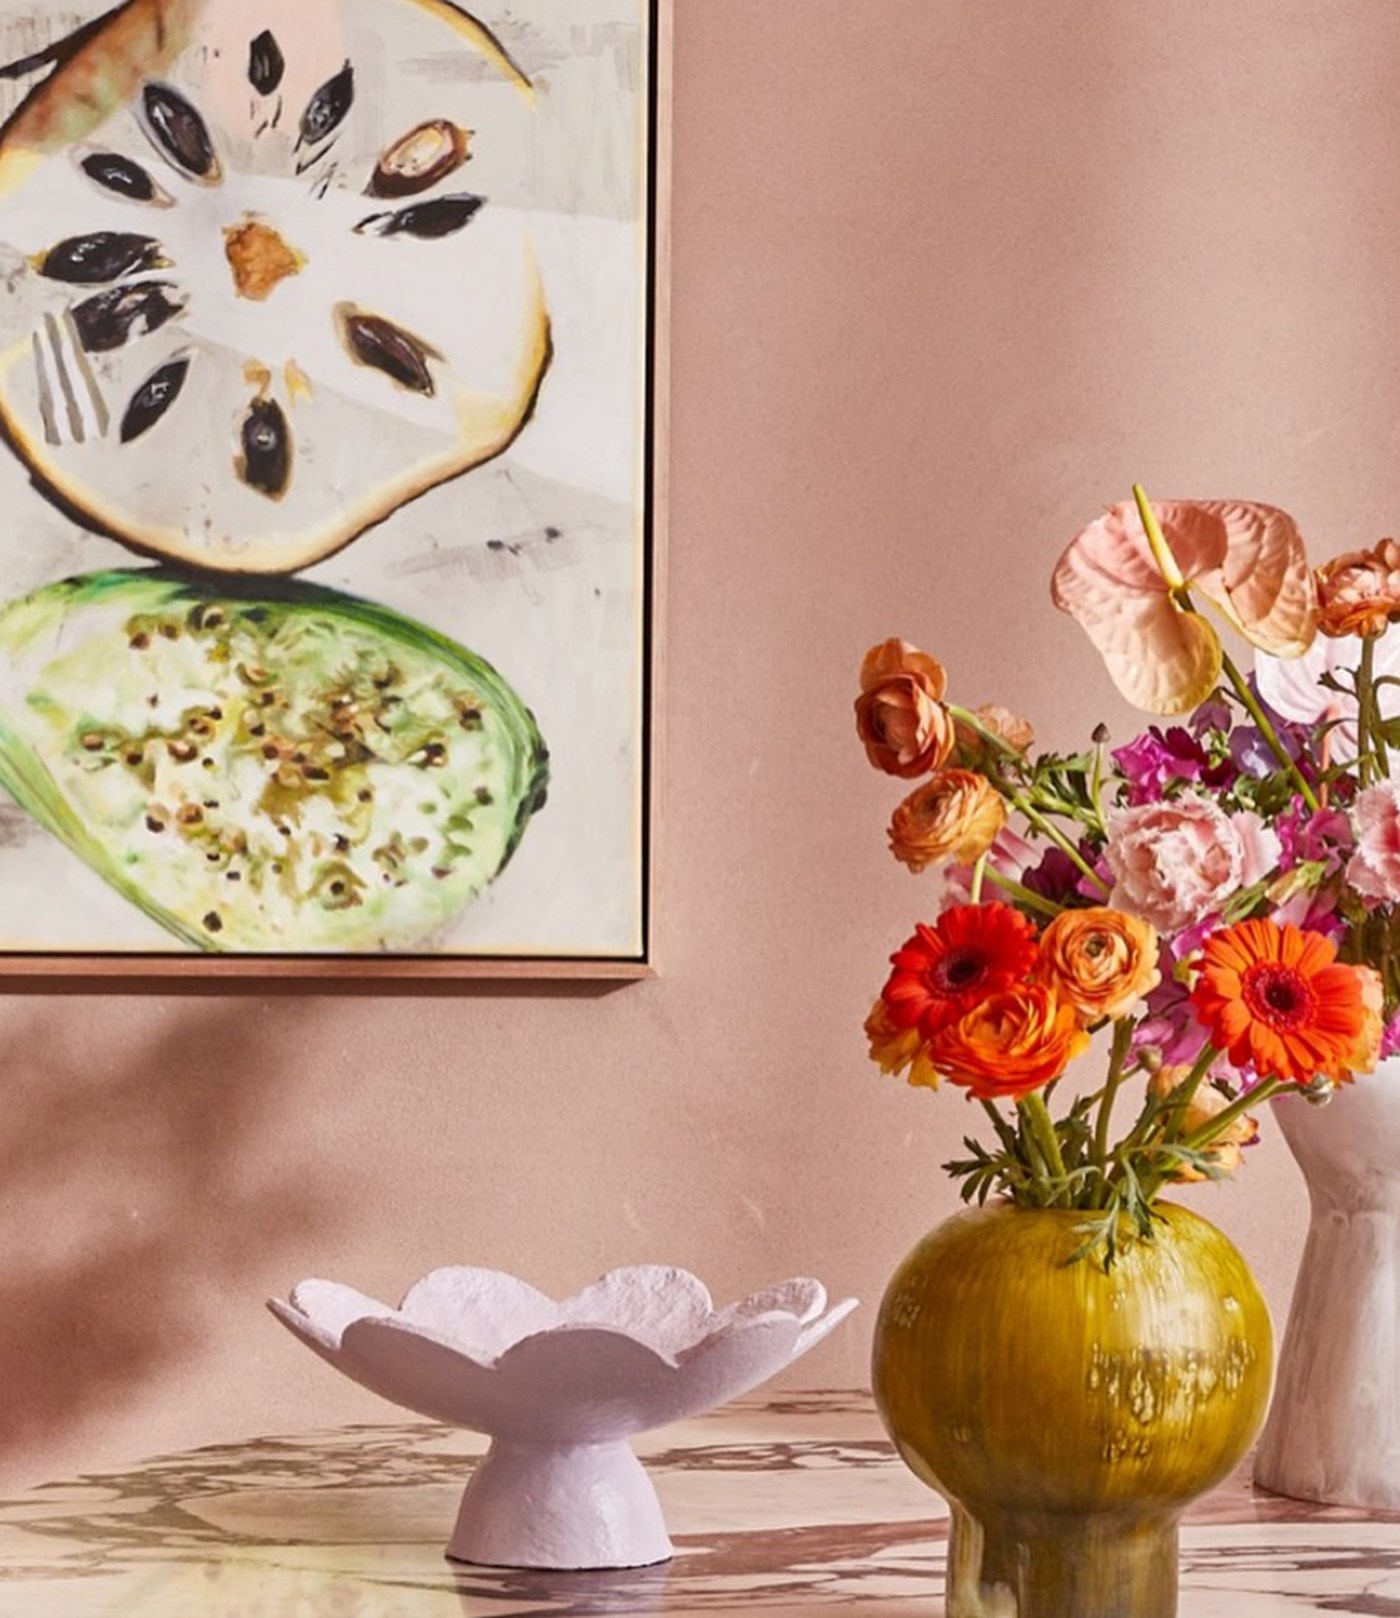 Multiple ceramic objects including a mustard vase full of flowers and a scalloped cake platter against a pink backdrop 